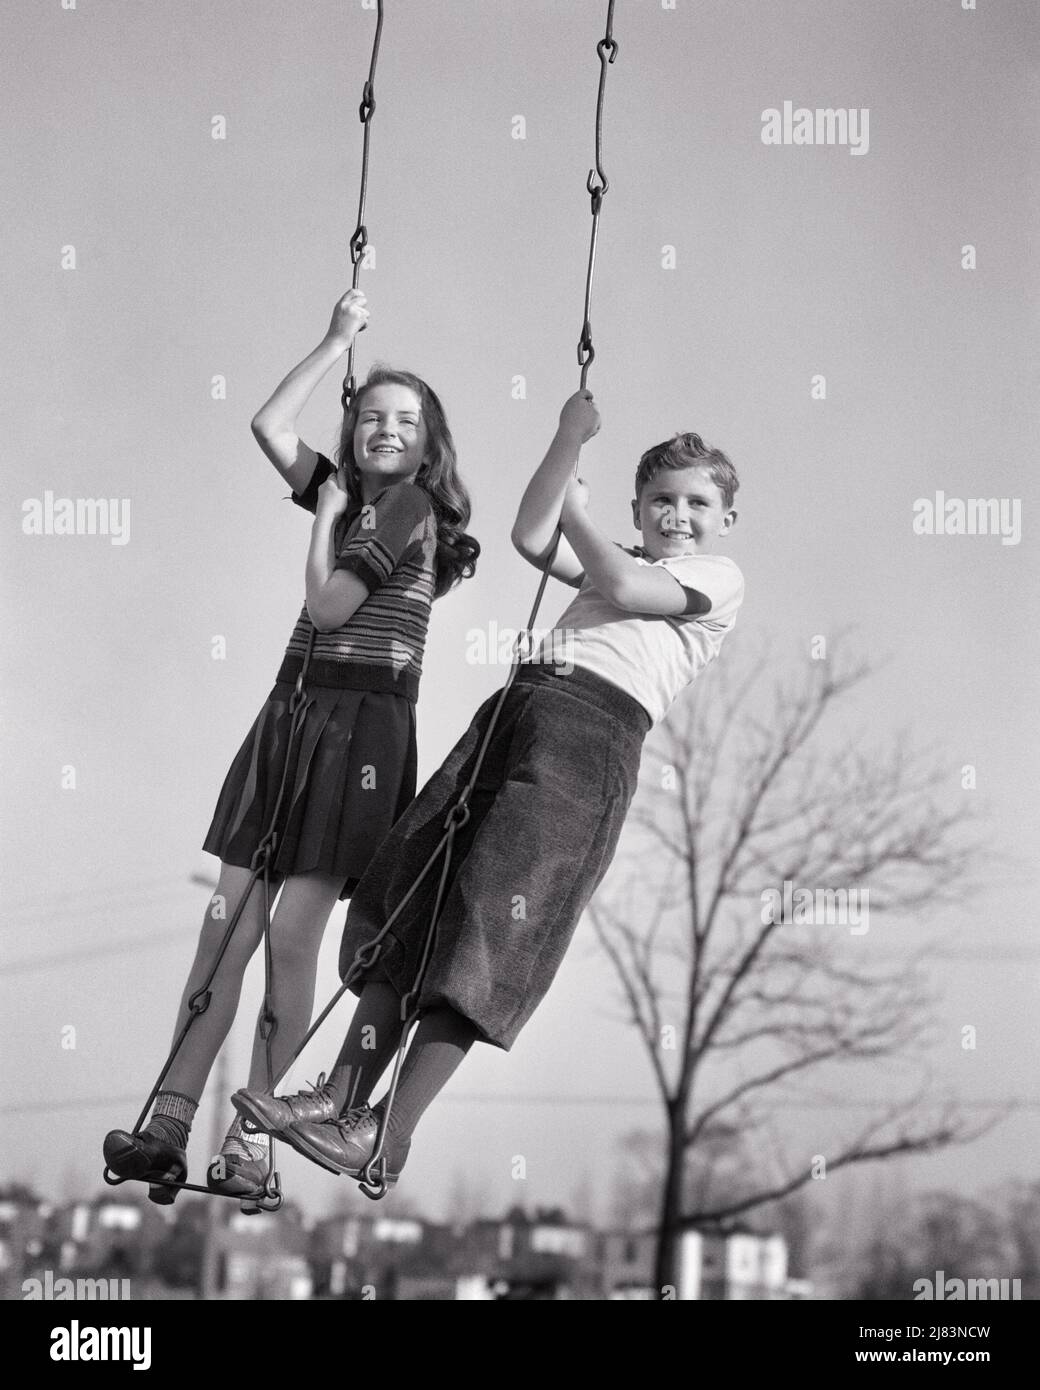 1930s SMILING PRETEEN BOY AND GIRL STANDING ON PLAYGROUND PARK CHAIN SWING SEAT LOOKING AT CAMERA - j7767 HAR001 HARS HEALTHY FRIEND BALANCE SAFETY TEAMWORK PANTS PLEASED JOY LIFESTYLE FEMALES RURAL CHAIN COPY SPACE FRIENDSHIP FULL-LENGTH PERSONS TRADITIONAL MALES RISK CONFIDENCE B&W EYE CONTACT ACTIVITY HAPPINESS PHYSICAL CHEERFUL STRENGTH TROUSERS AND CHOICE LOW ANGLE RECREATION PRIDE ON PRETEEN SMILES SWINGING KNEE SOCKS CLINGING CONCEPTUAL FLEXIBILITY FRIENDLY JOYFUL MUSCLES STYLISH SWINGS KNICKERBOCKERS PLUS FOURS GROWTH JUVENILES PRE-TEEN PRE-TEEN BOY PRE-TEEN GIRL TOGETHERNESS Stock Photo